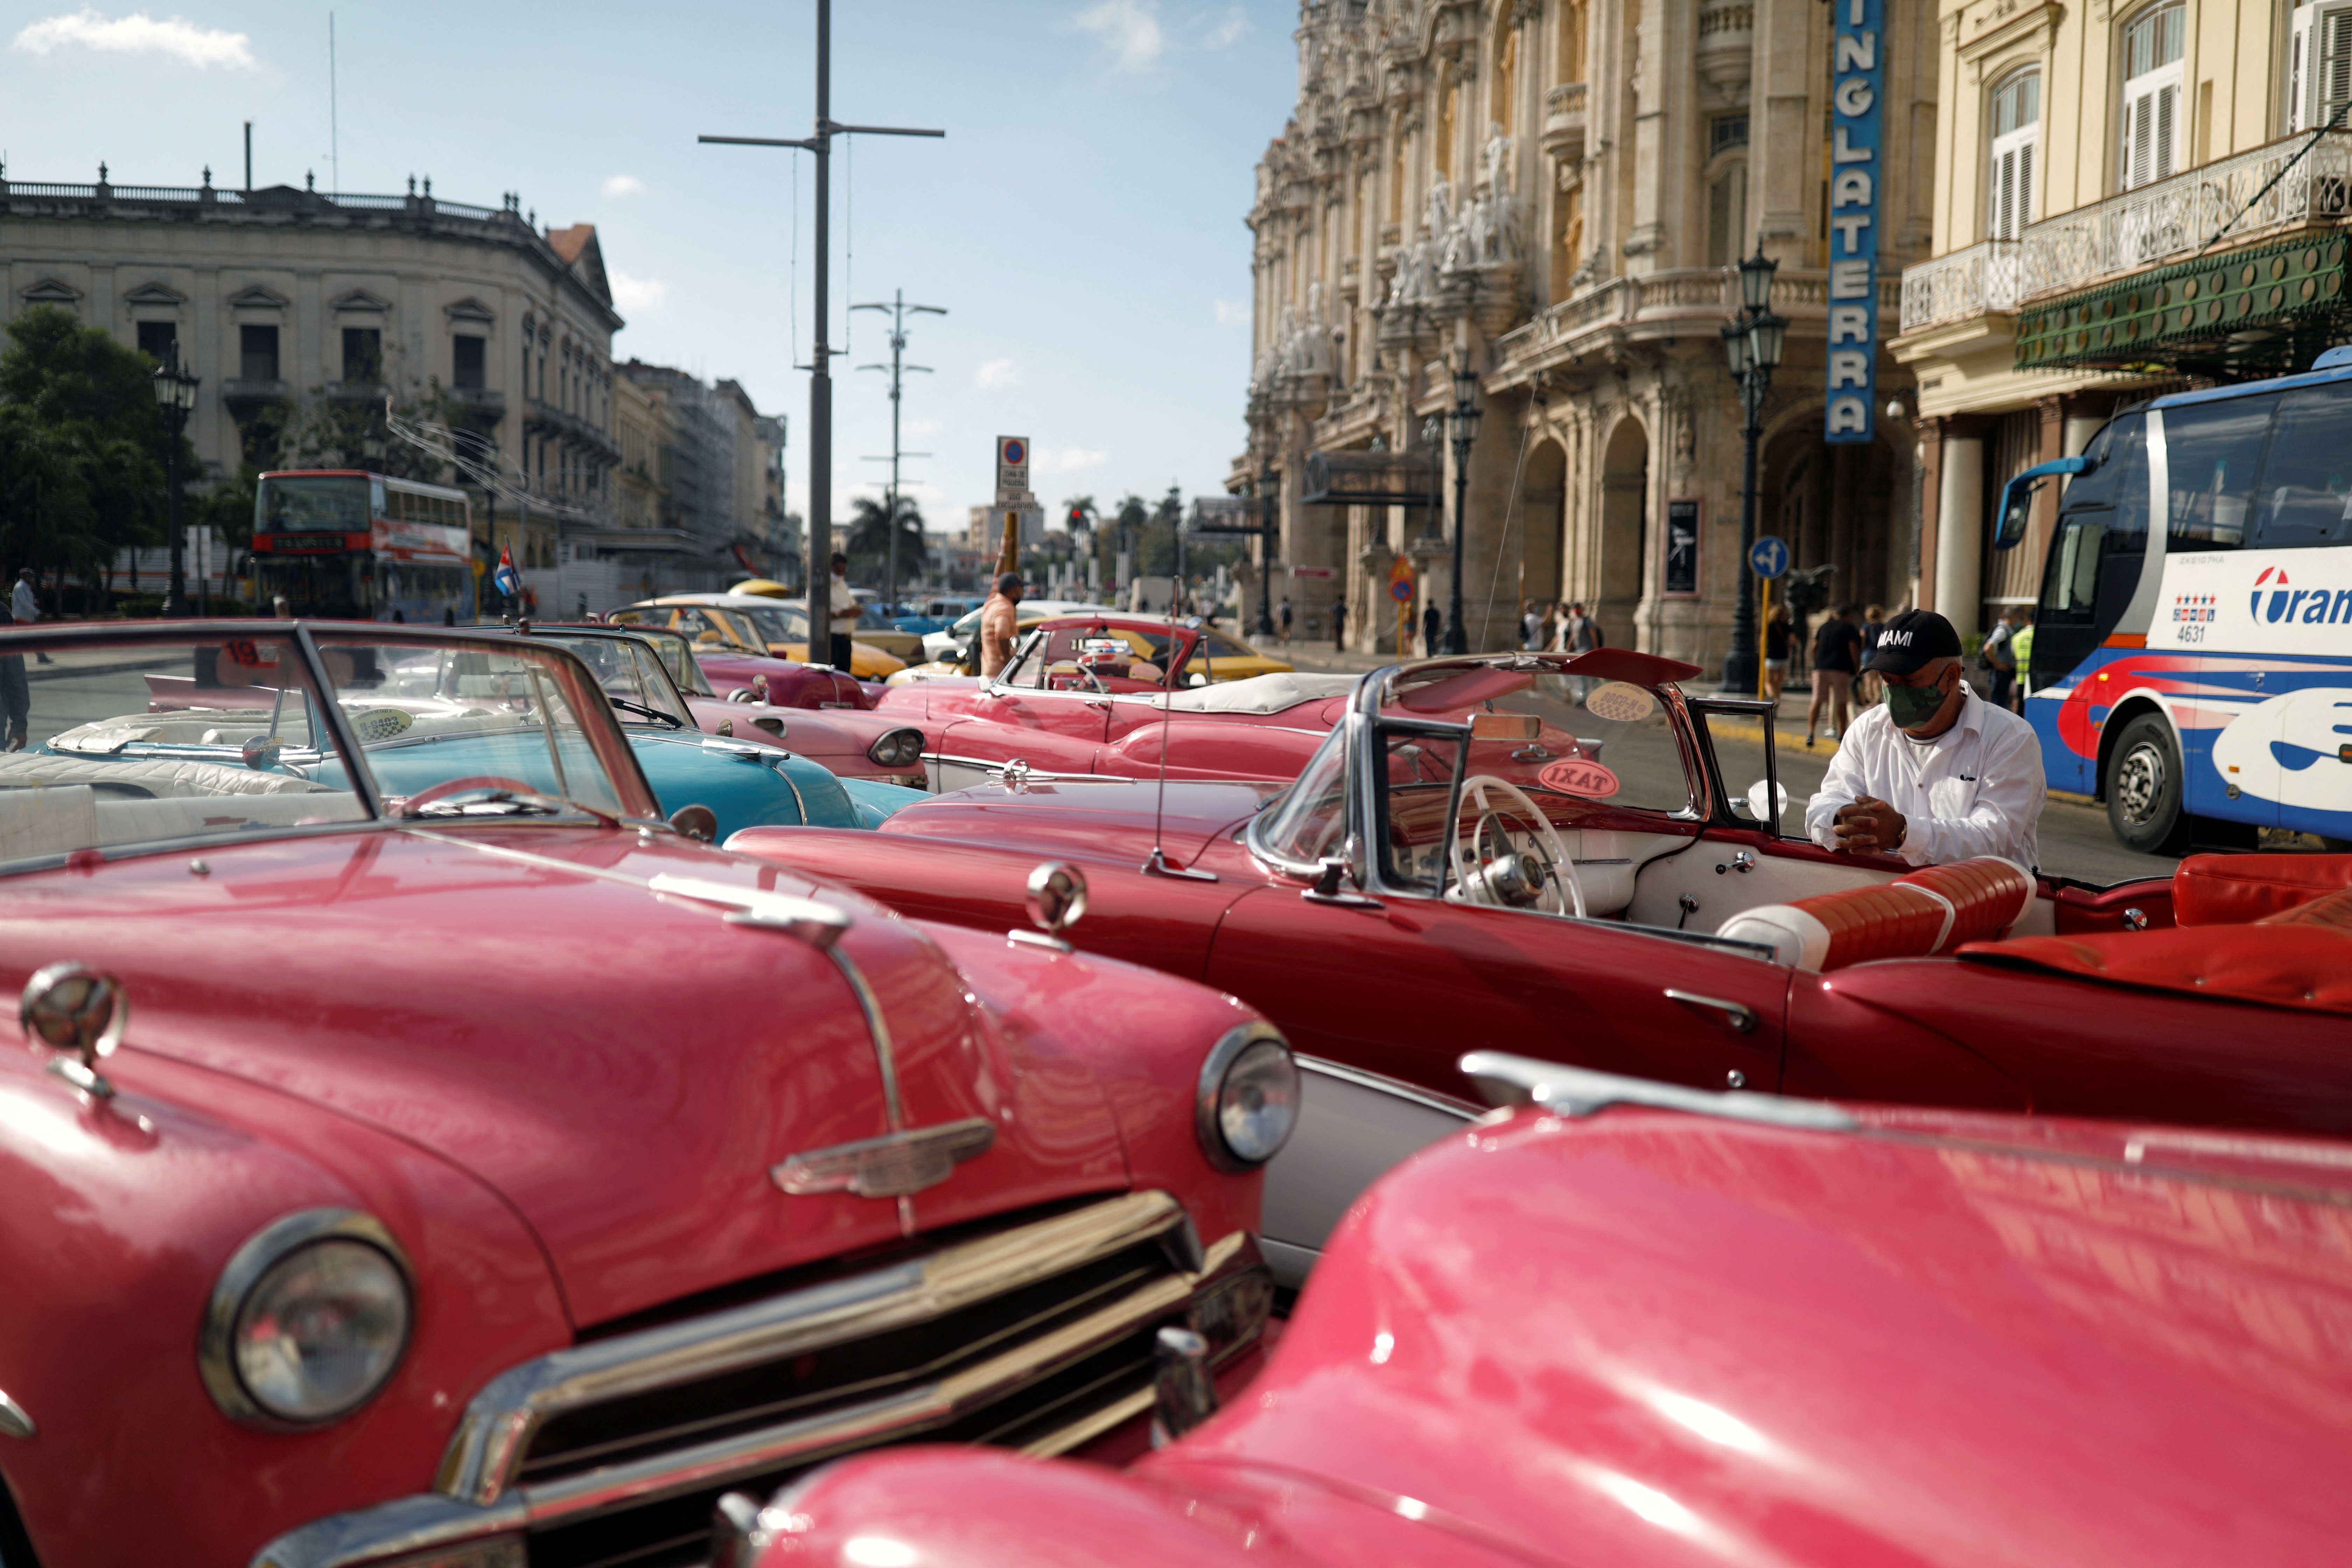 Taxi drivers wait for tourists next to vintage cars in Havana